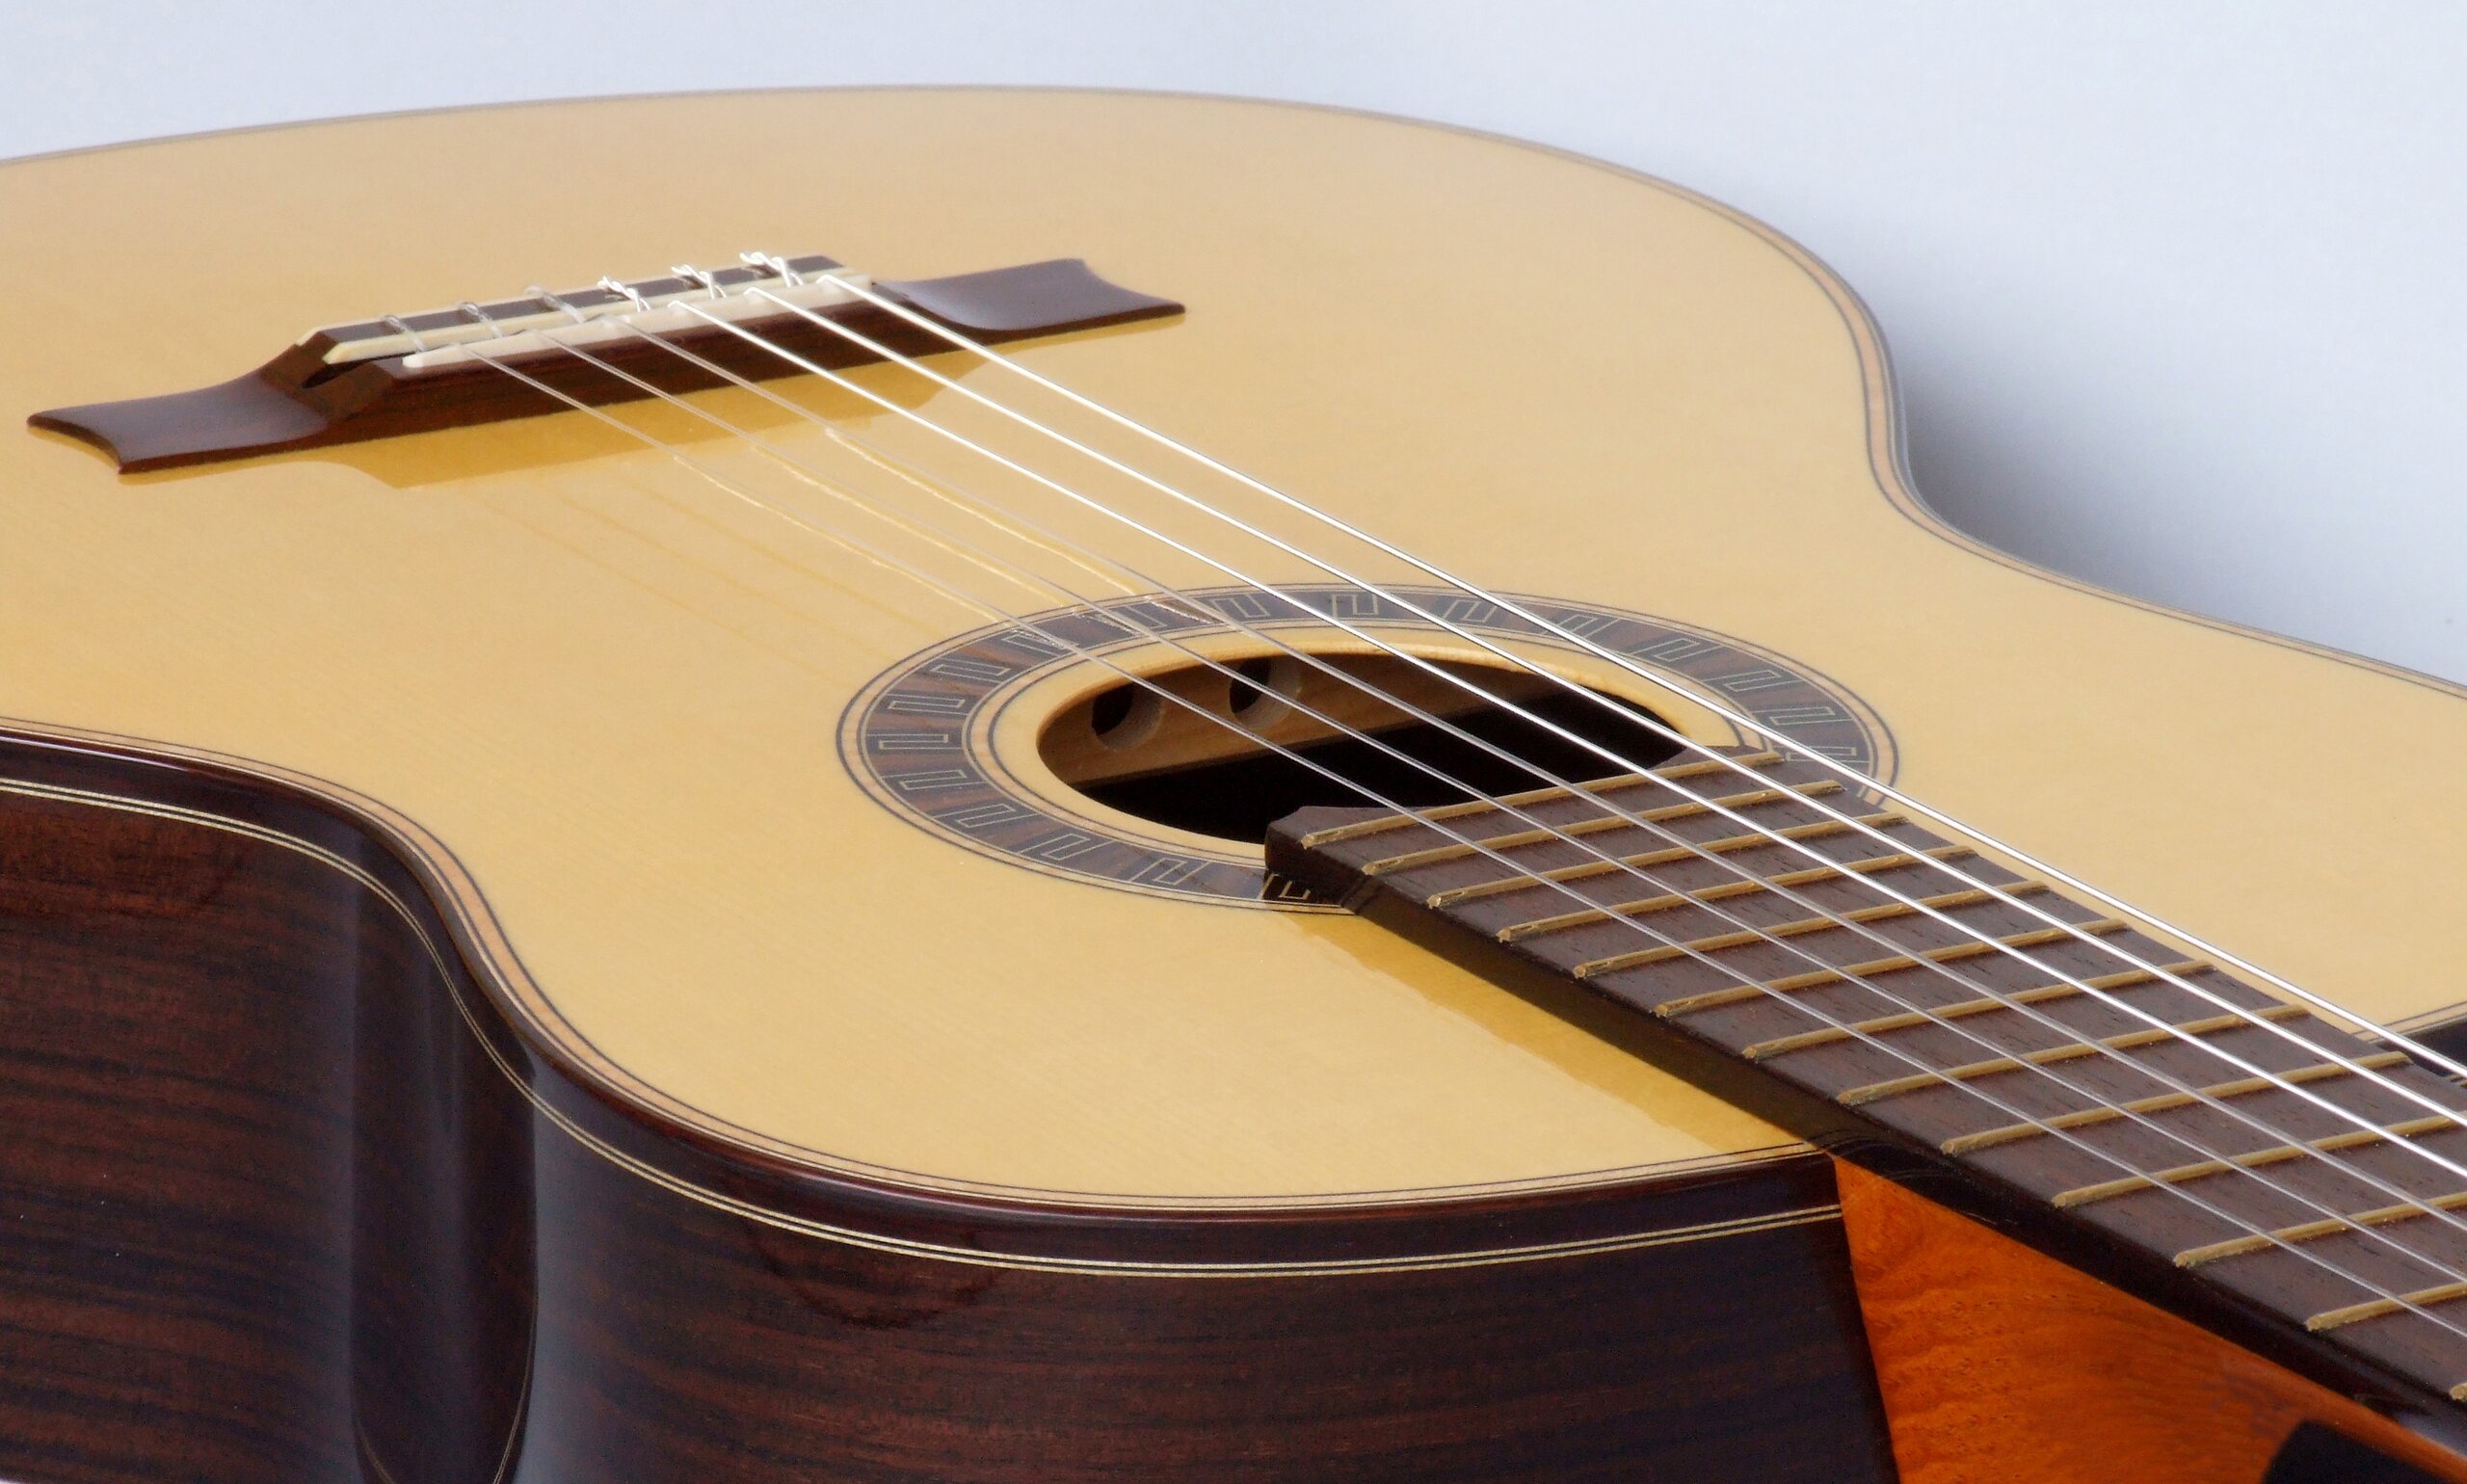 Custom guitars. Classical guitar with spruce top and meander rosette